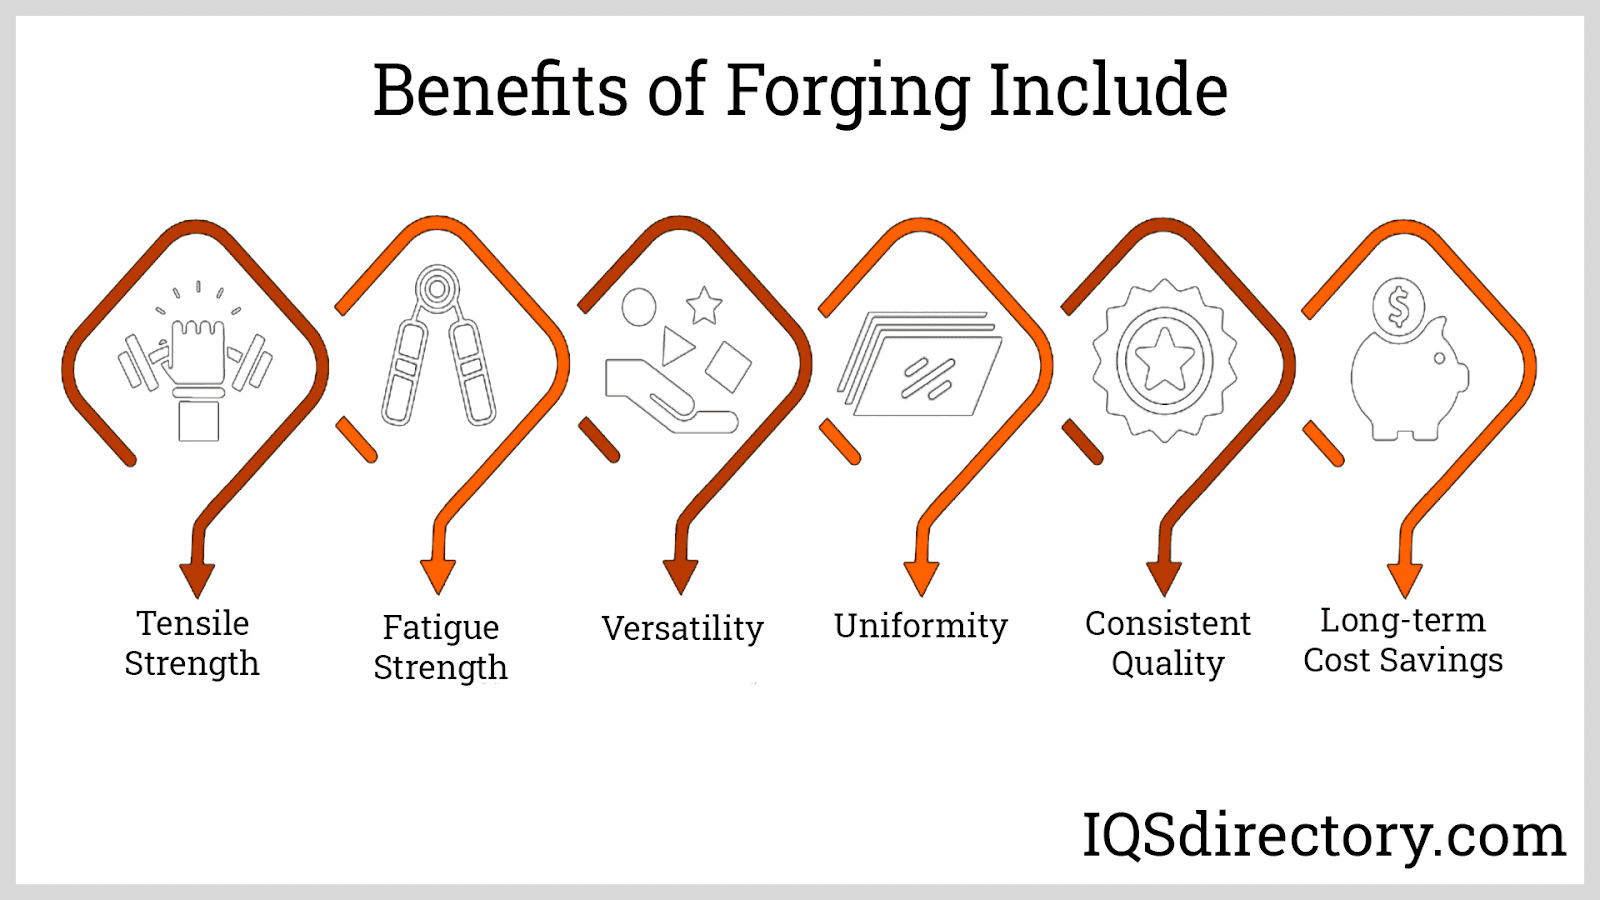 Benefits of Forging Include